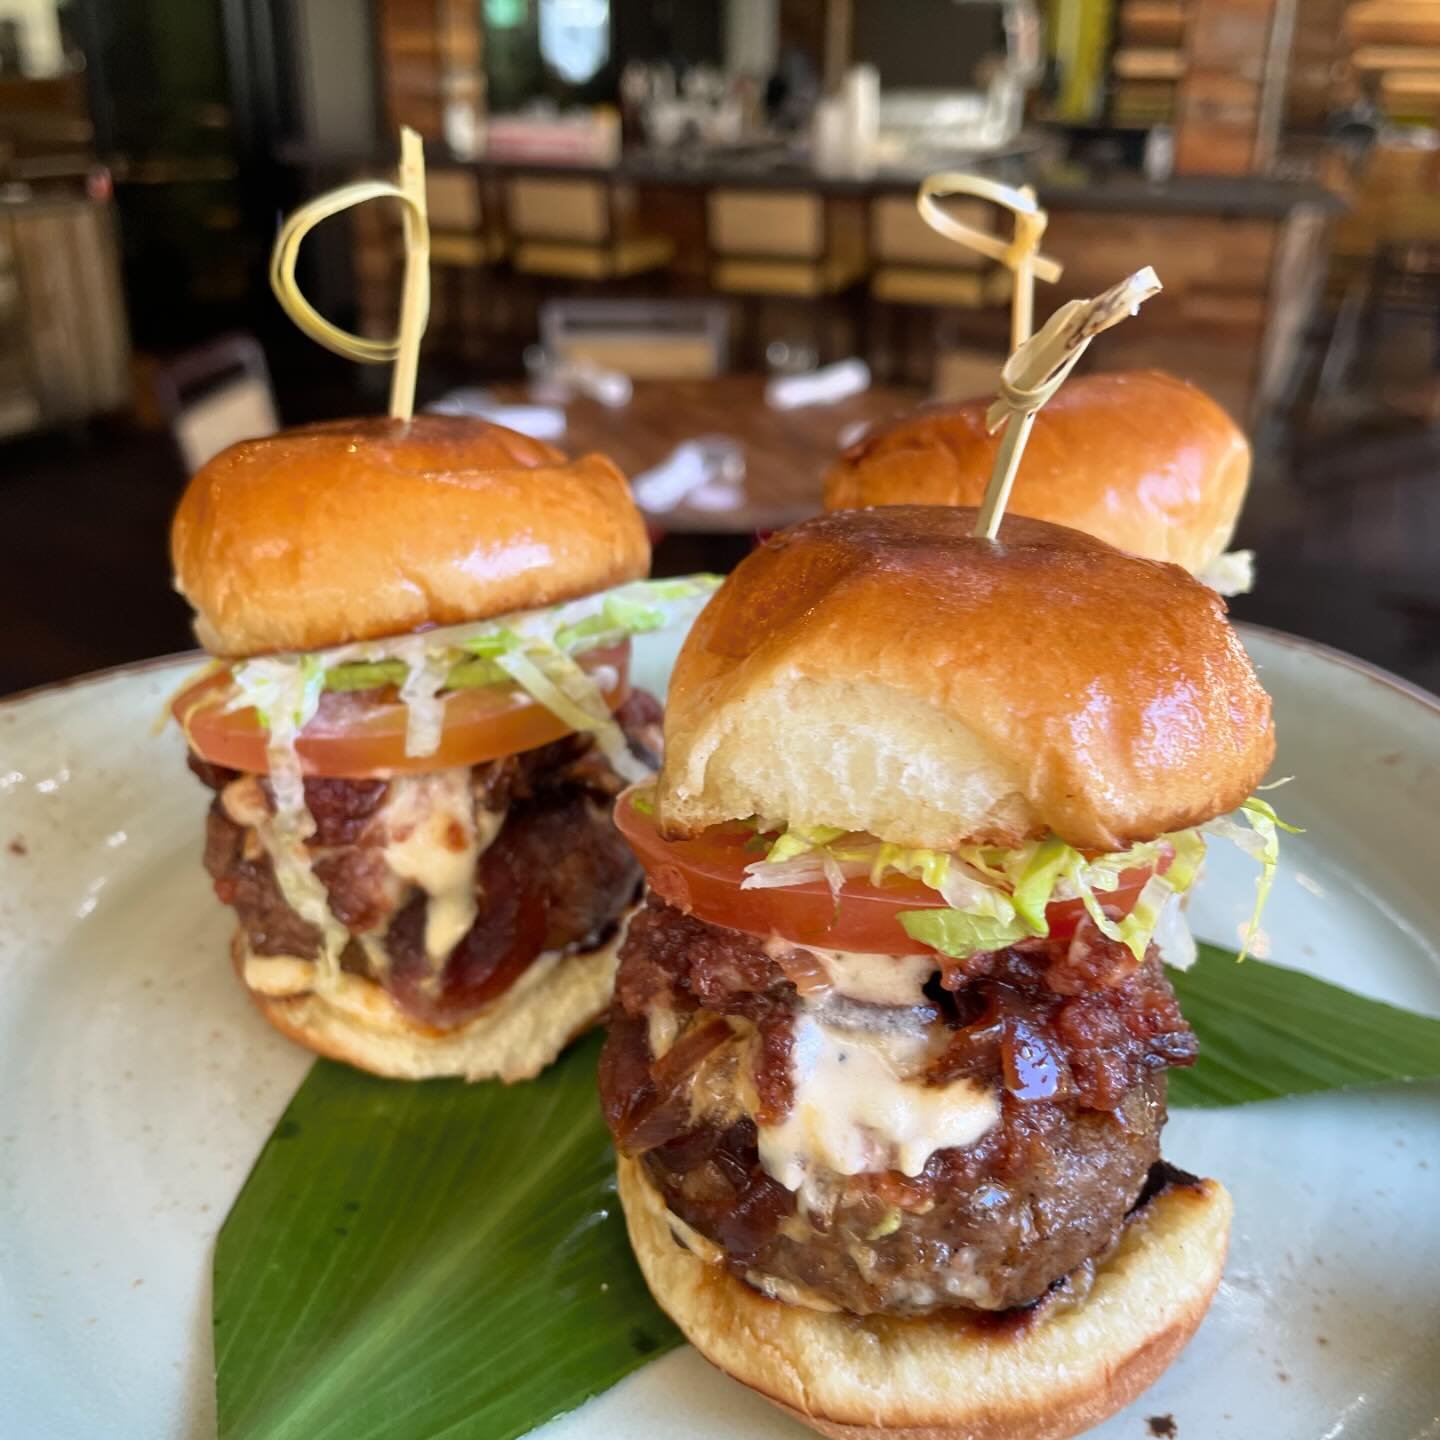 We still have our in restaurant dine event happening until Sunday, May 5! Visit various restaurants in the International Marketplace to find exclusive SPAM dishes only available until the end of the week! 
.
Featured here is the Hapa Burger from Eati